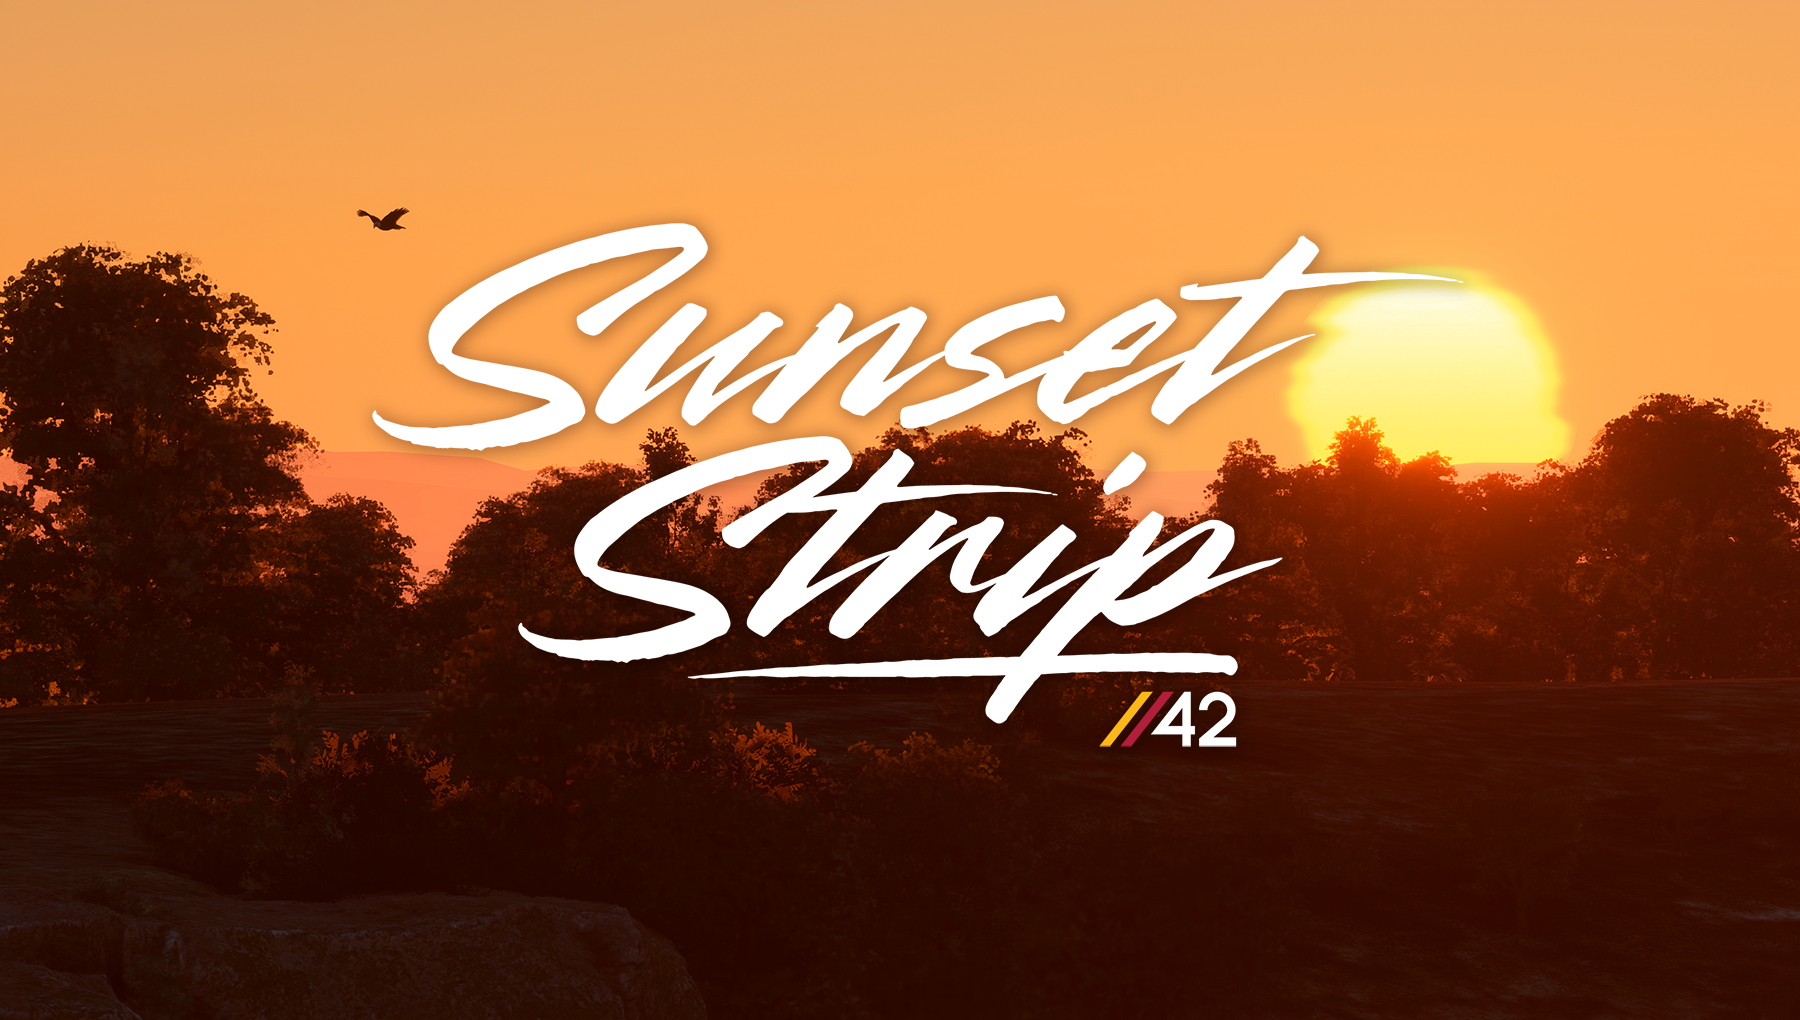 RELEASE: //42 Sunset Strip Scene for MSFS on PC & Xbox